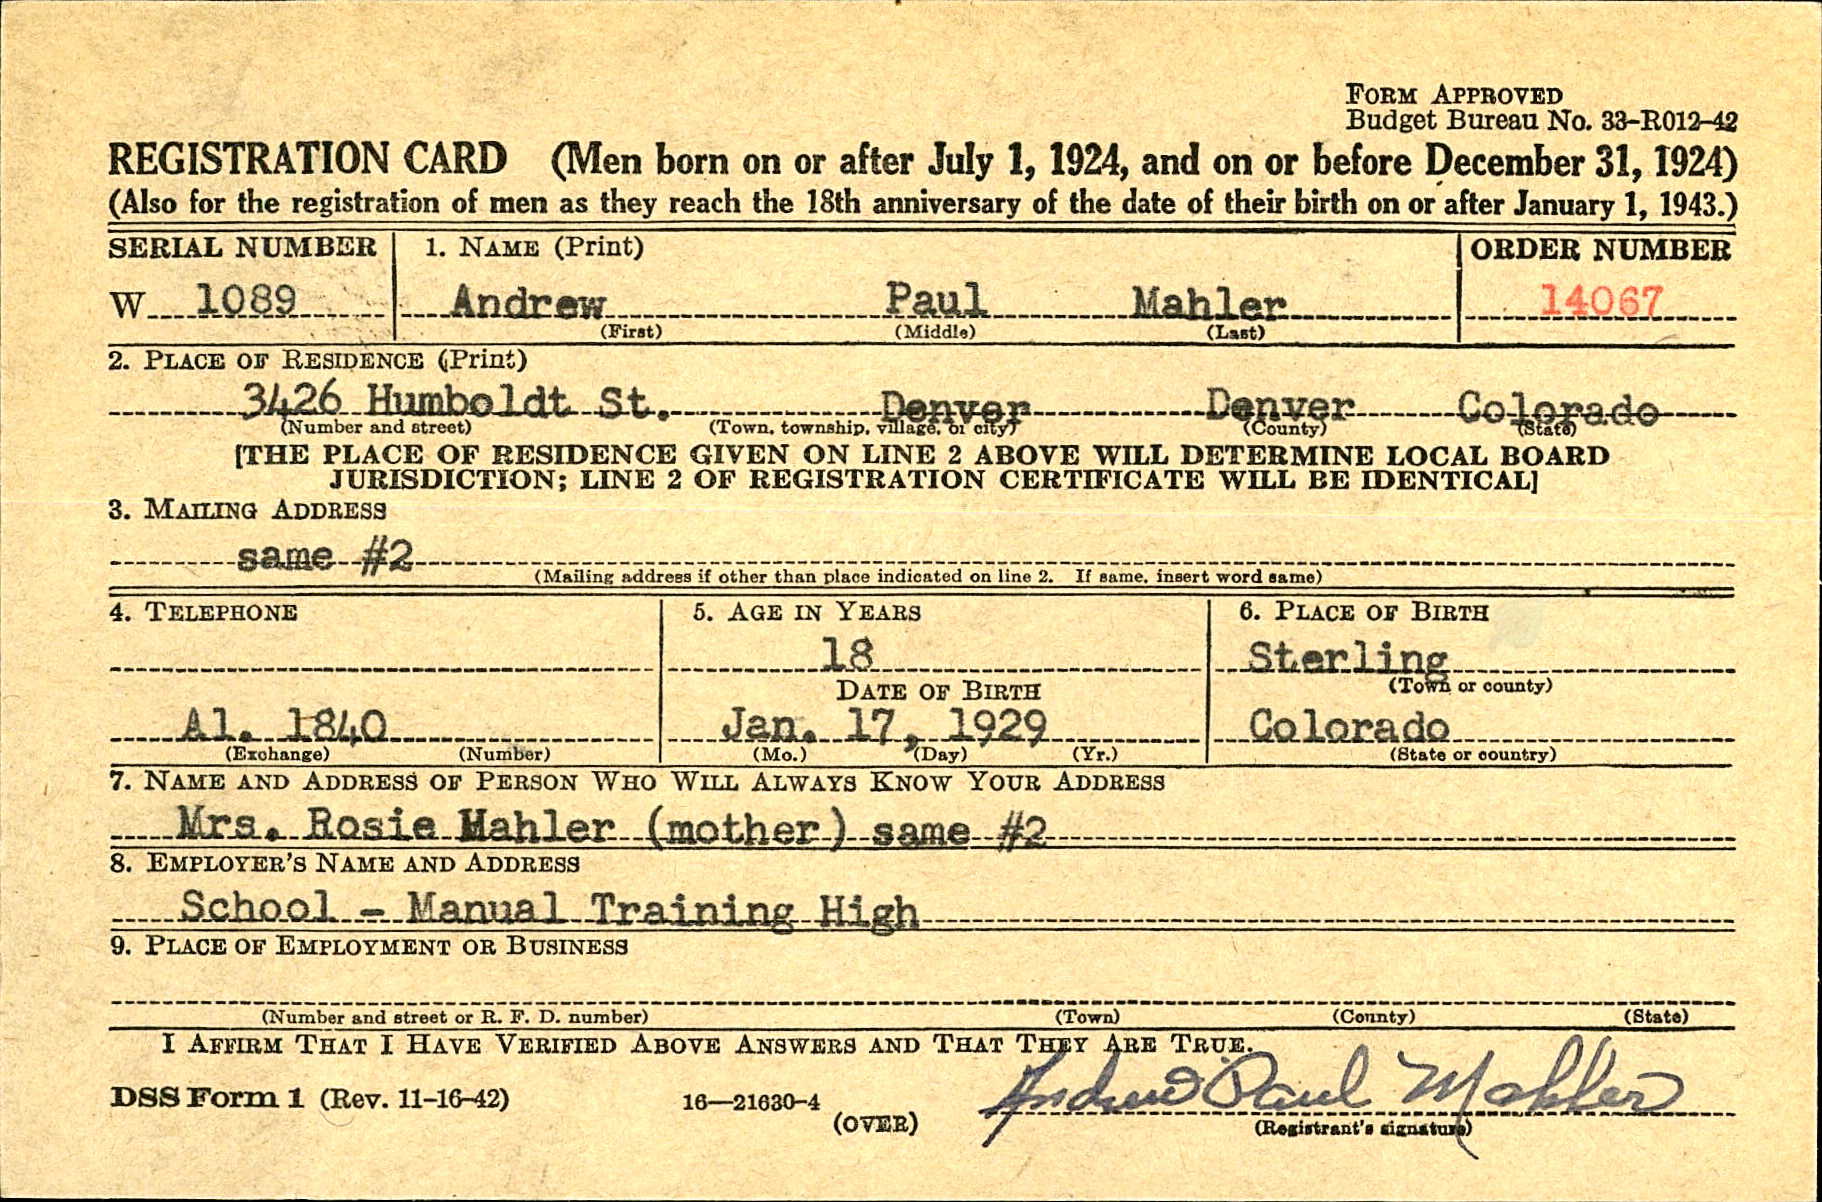 World War II draft card of Andrew Paul Mahler, page 1